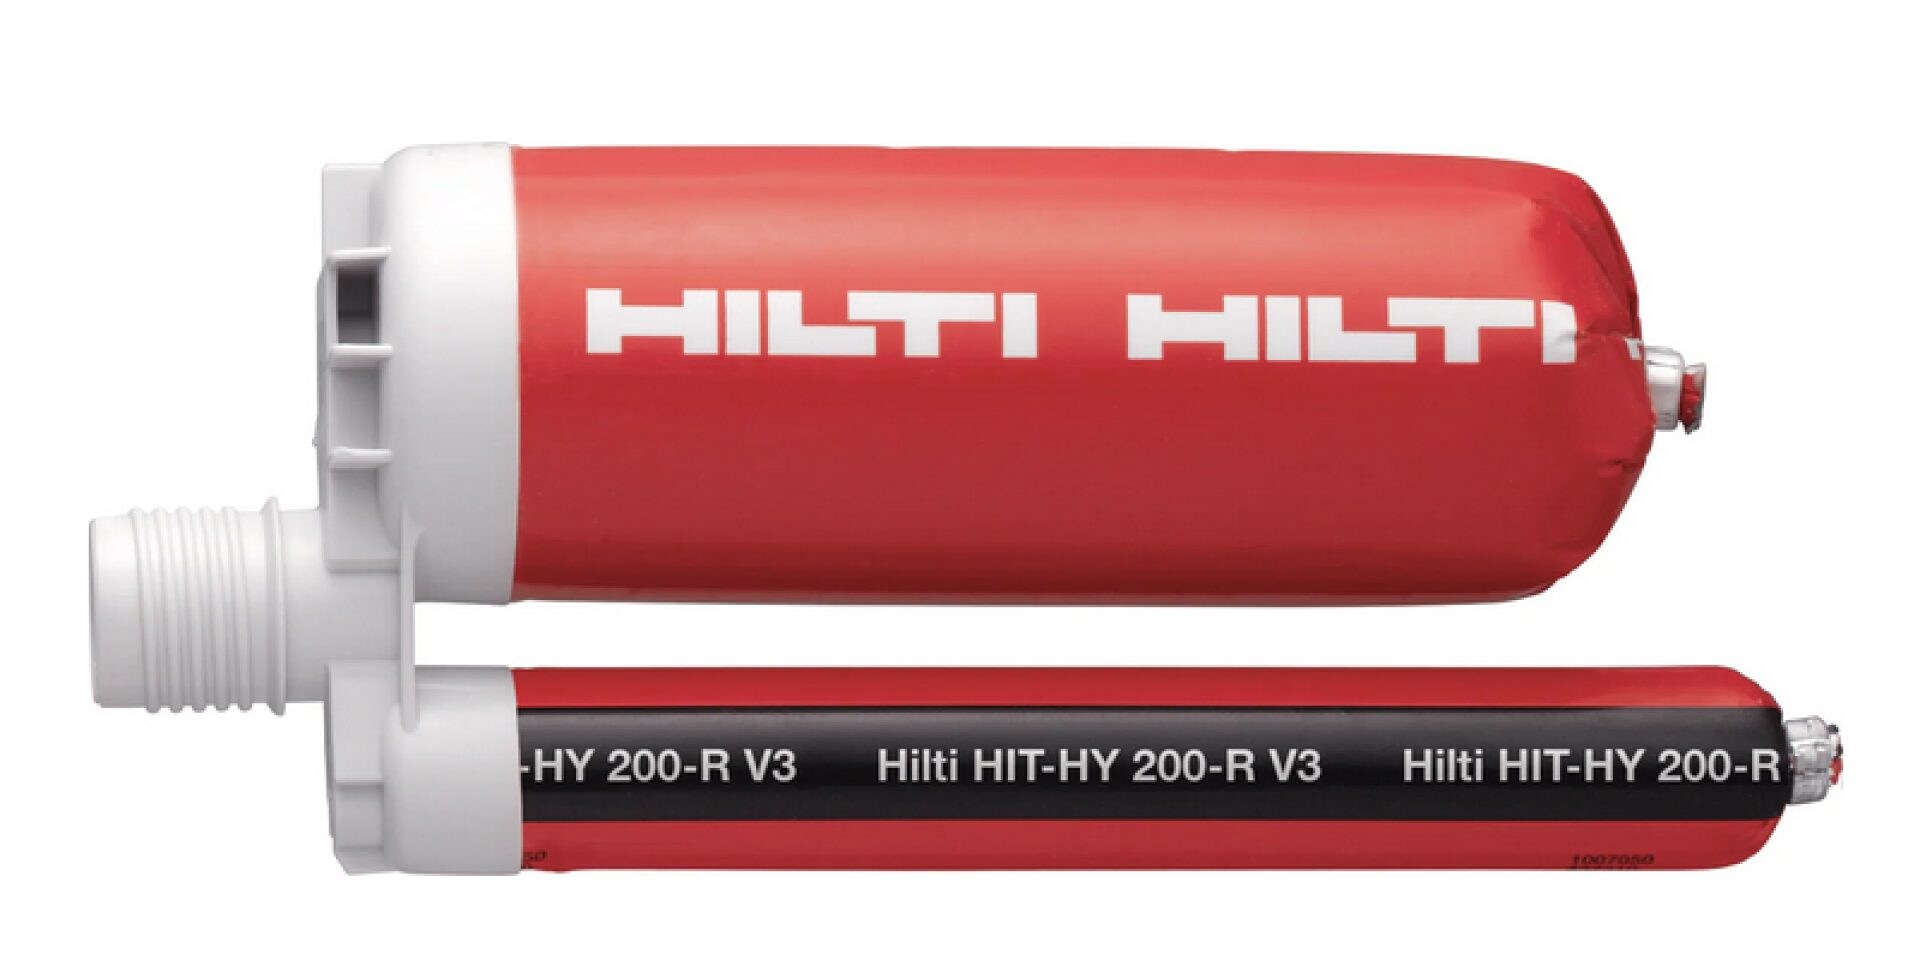 Hilti HIT-HY 200 chemical anchor system